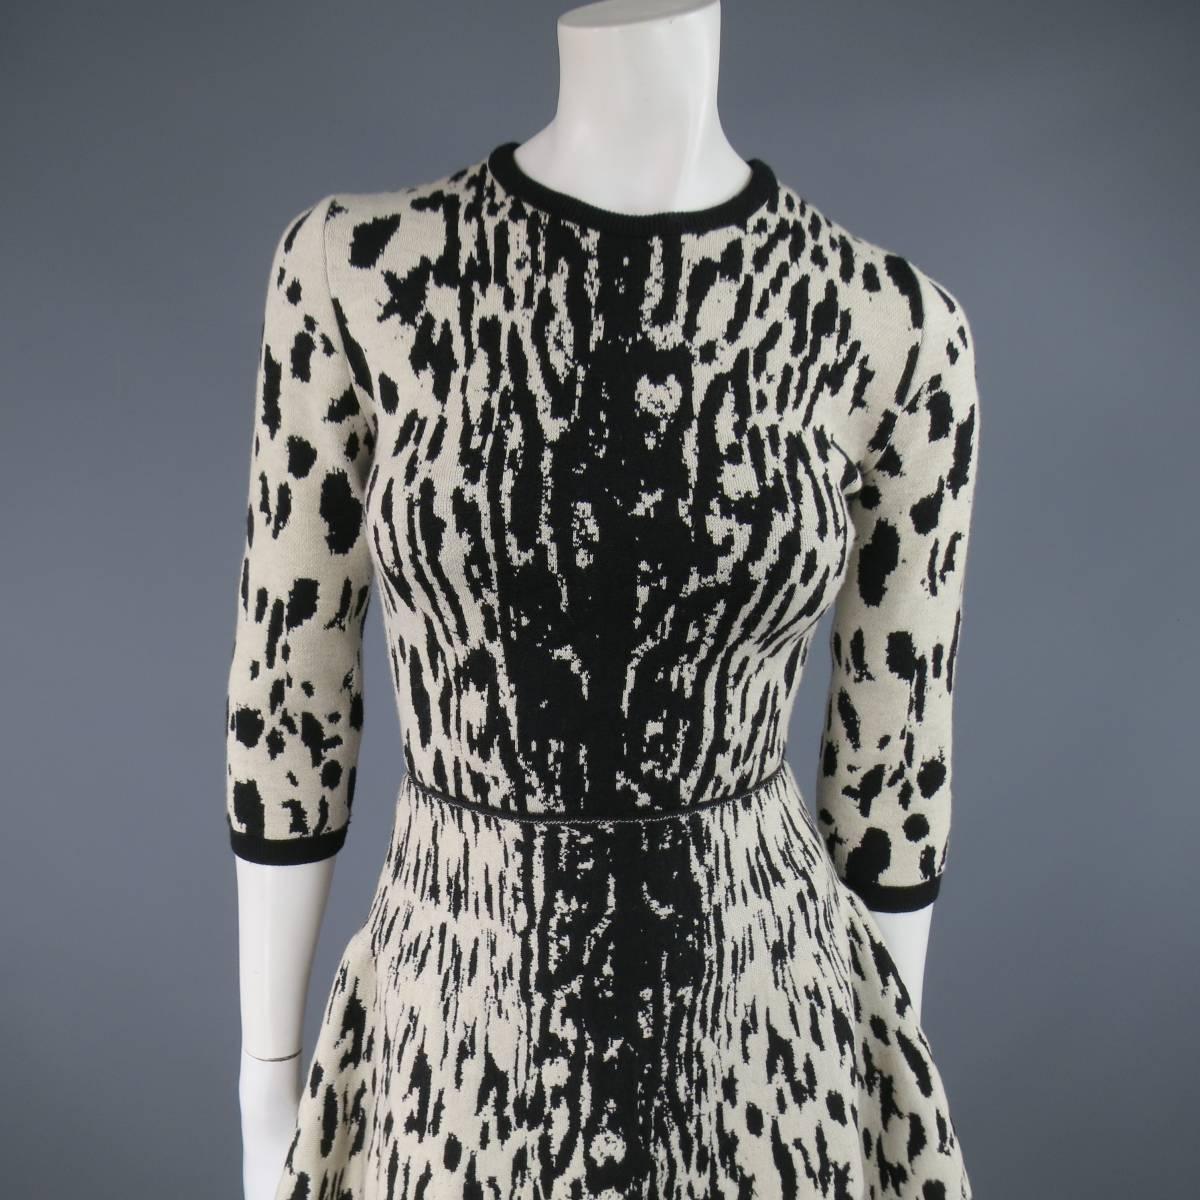 This chic LANVIN Fall 2013 dress comes in a heavy textures stretch wool and features a beige and black cheetah leopard print throughout, crewneck, 3/4 sleeves, fitted waist, and flared skirt. Made in Italy.
 
Excellent Pre-Owned Condition.
No